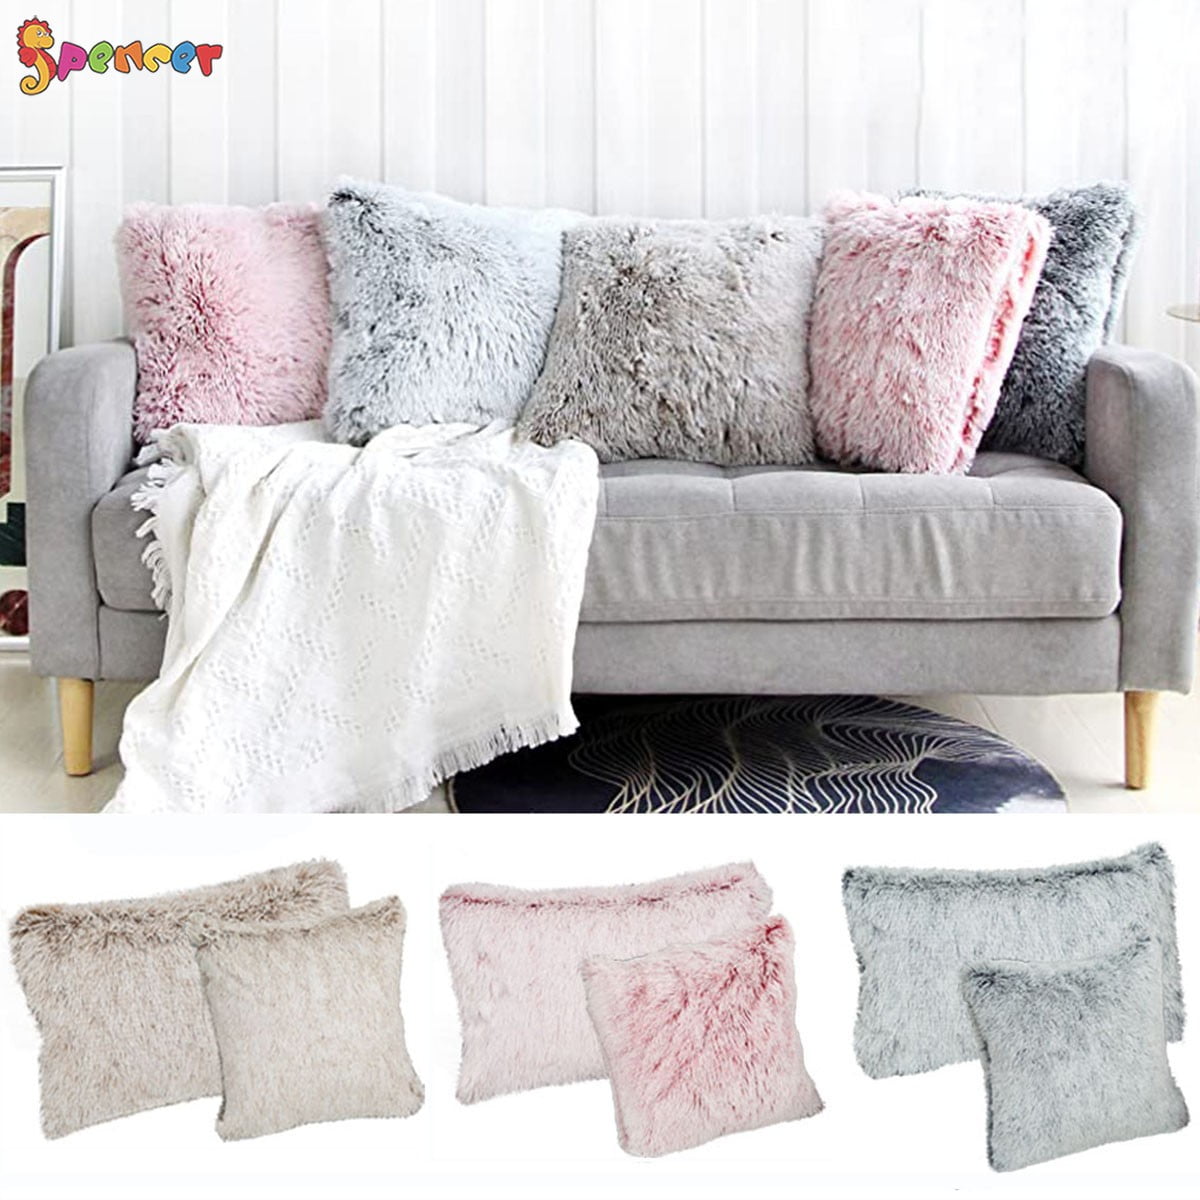 and Bed 20x20 Inches Chair Chanasya Ultra Soft Velvet Throw Pillow Cover Bright and Colorful Super Soft Modern Decorative Home Decor for Sofa Off White